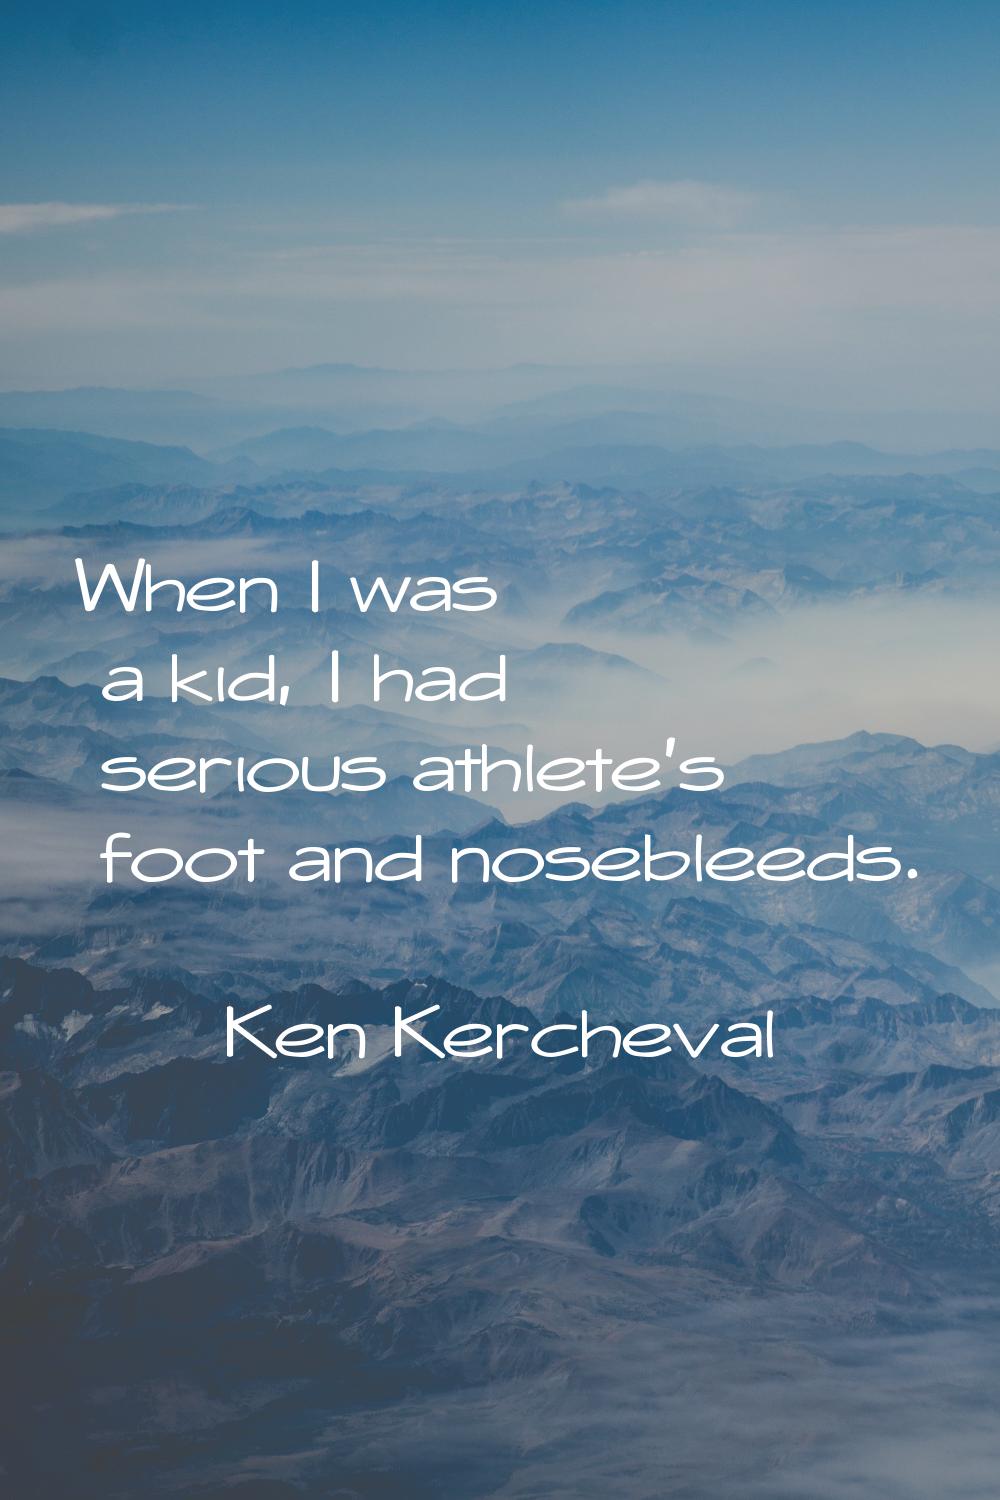 When I was a kid, I had serious athlete's foot and nosebleeds.